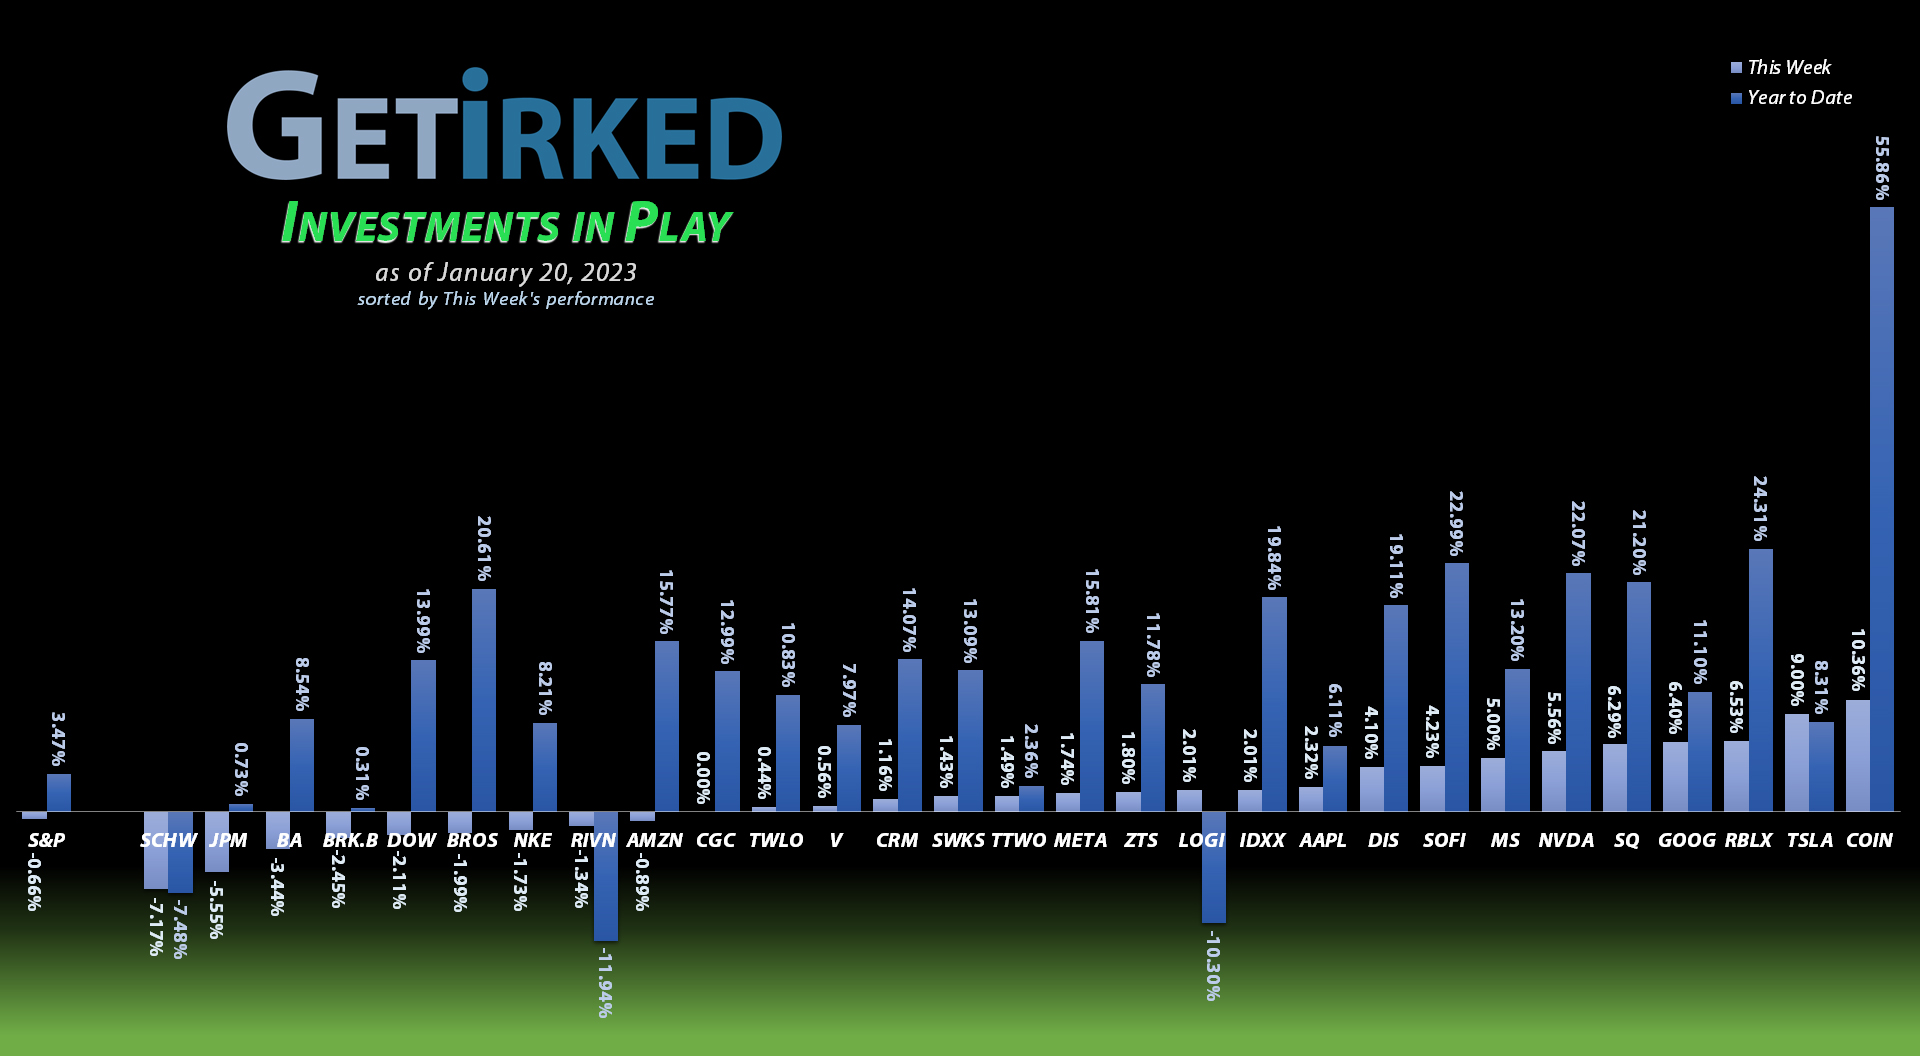 Get Irked - Investments in Play - January 20, 2023